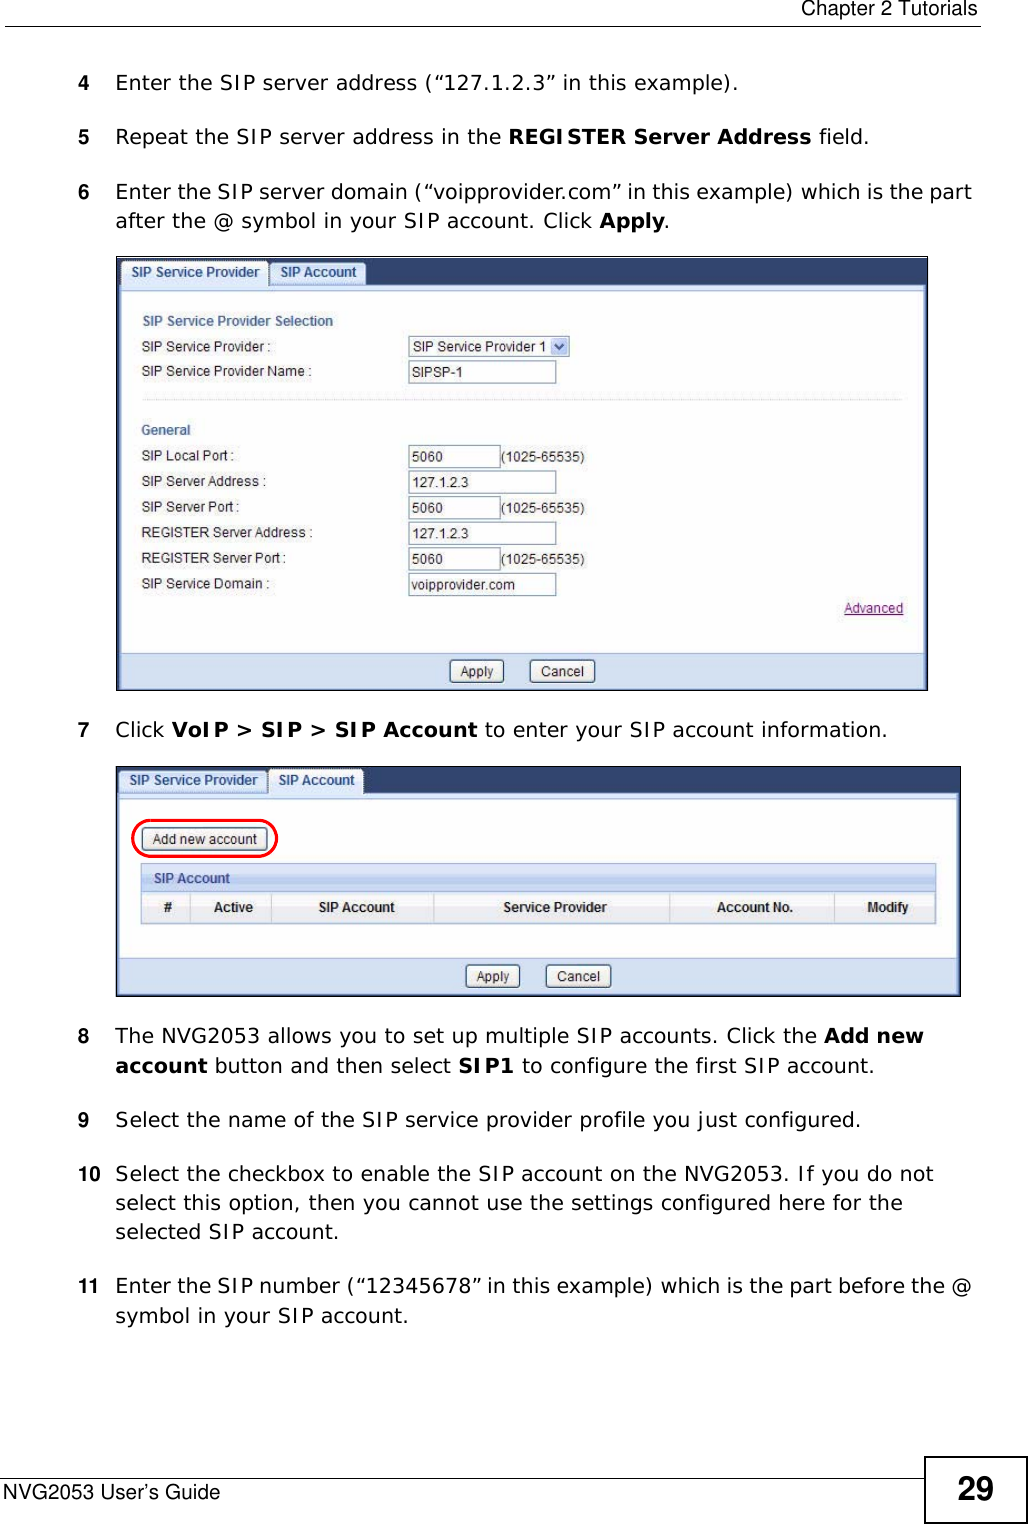  Chapter 2 TutorialsNVG2053 User’s Guide 294Enter the SIP server address (“127.1.2.3” in this example). 5Repeat the SIP server address in the REGISTER Server Address field.6Enter the SIP server domain (“voipprovider.com” in this example) which is the part after the @ symbol in your SIP account. Click Apply.7Click VoIP &gt; SIP &gt; SIP Account to enter your SIP account information. 8The NVG2053 allows you to set up multiple SIP accounts. Click the Add new account button and then select SIP1 to configure the first SIP account.9Select the name of the SIP service provider profile you just configured.10 Select the checkbox to enable the SIP account on the NVG2053. If you do not select this option, then you cannot use the settings configured here for the selected SIP account.11 Enter the SIP number (“12345678” in this example) which is the part before the @ symbol in your SIP account.